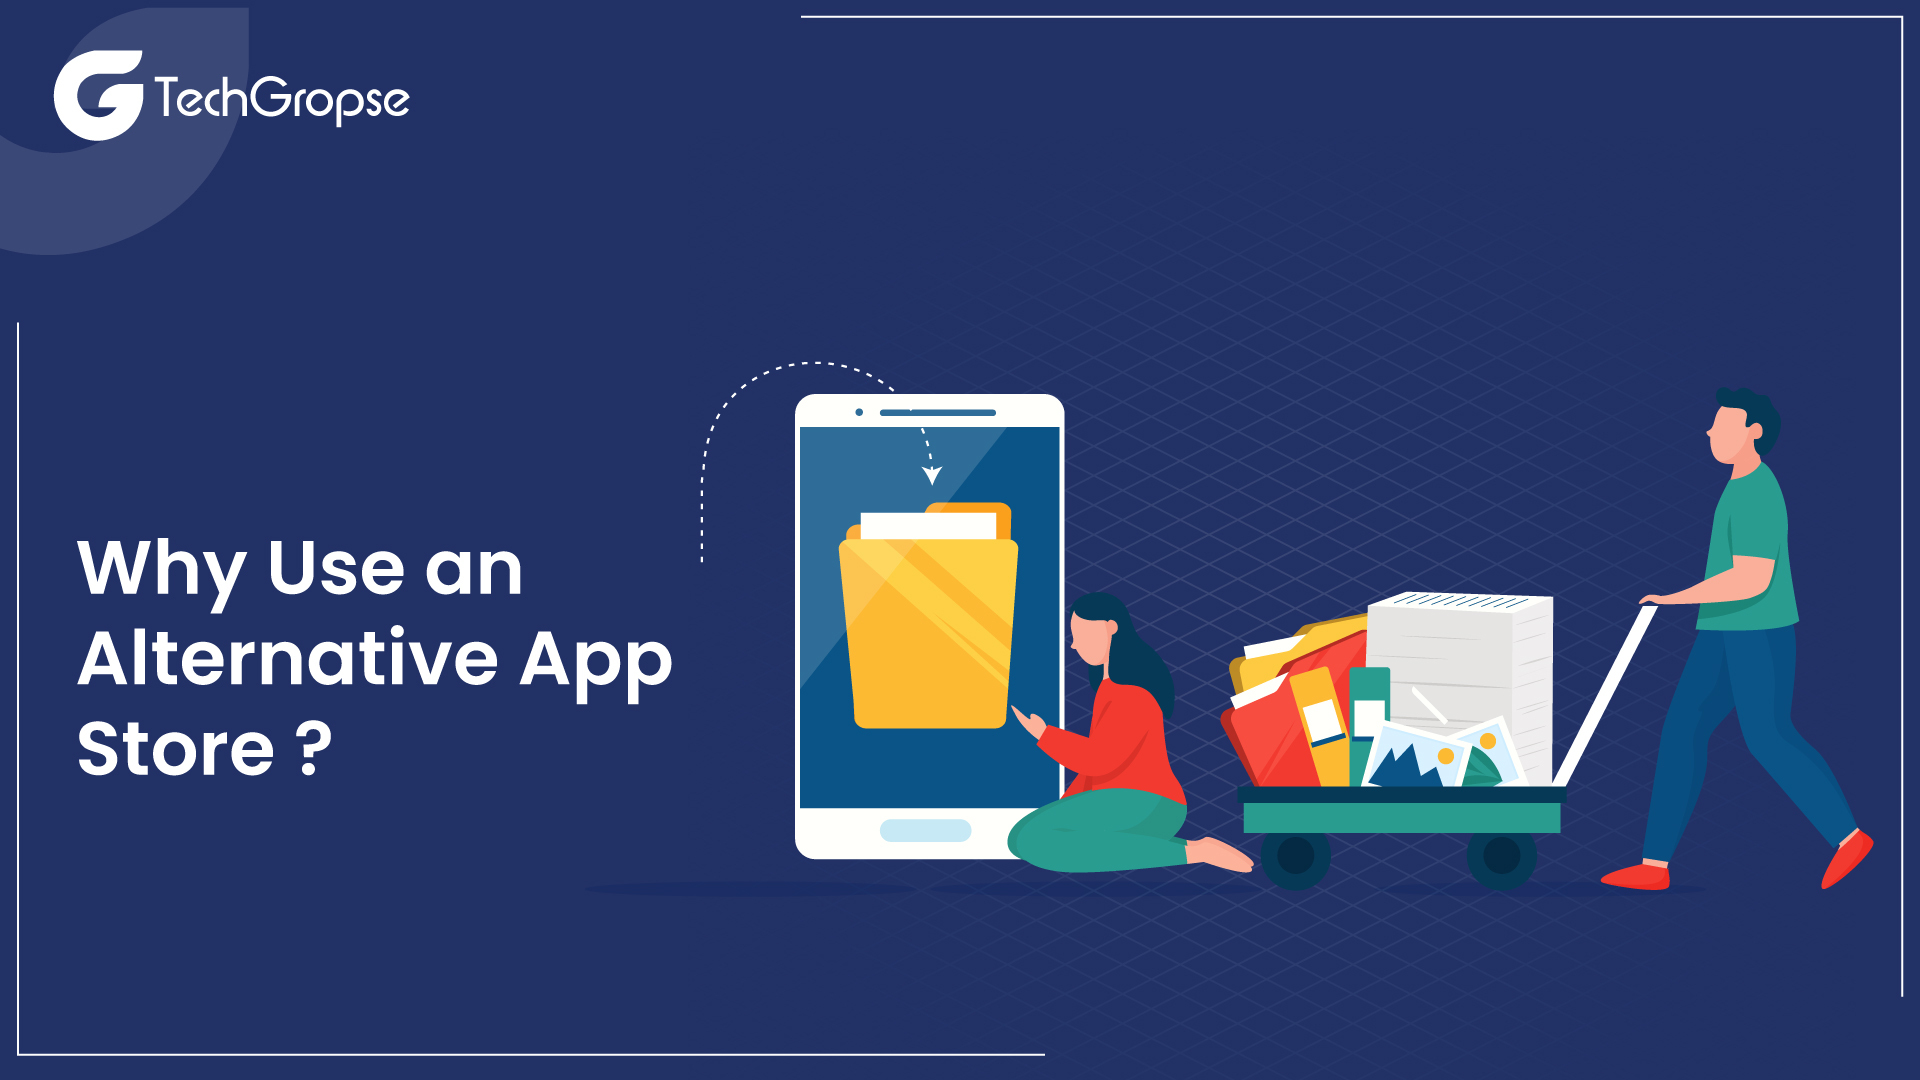 Why Use an Alternative App Store?